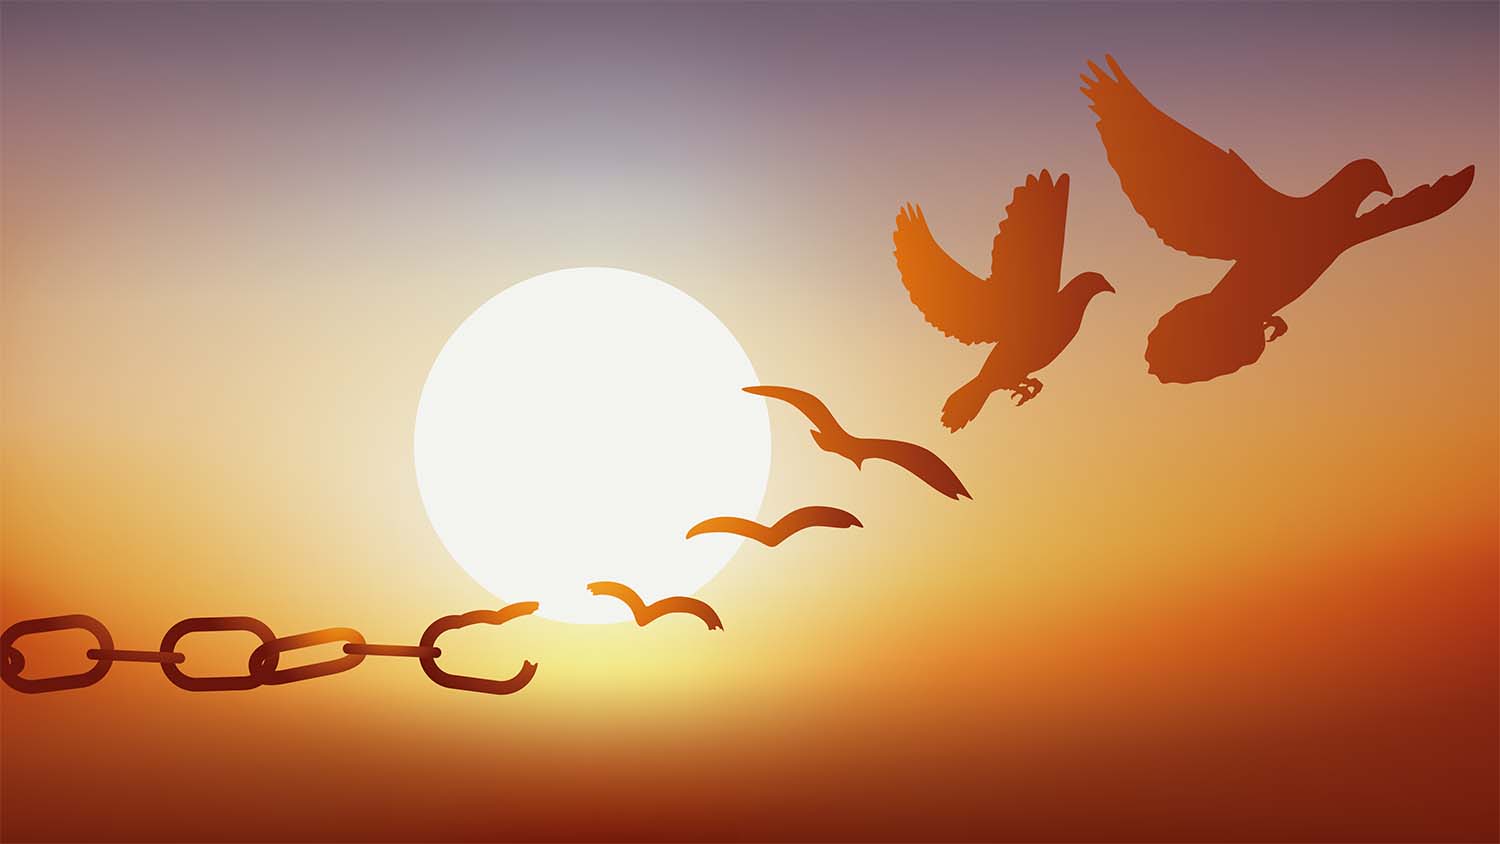 Illustration of chain becoming a bird that flies away